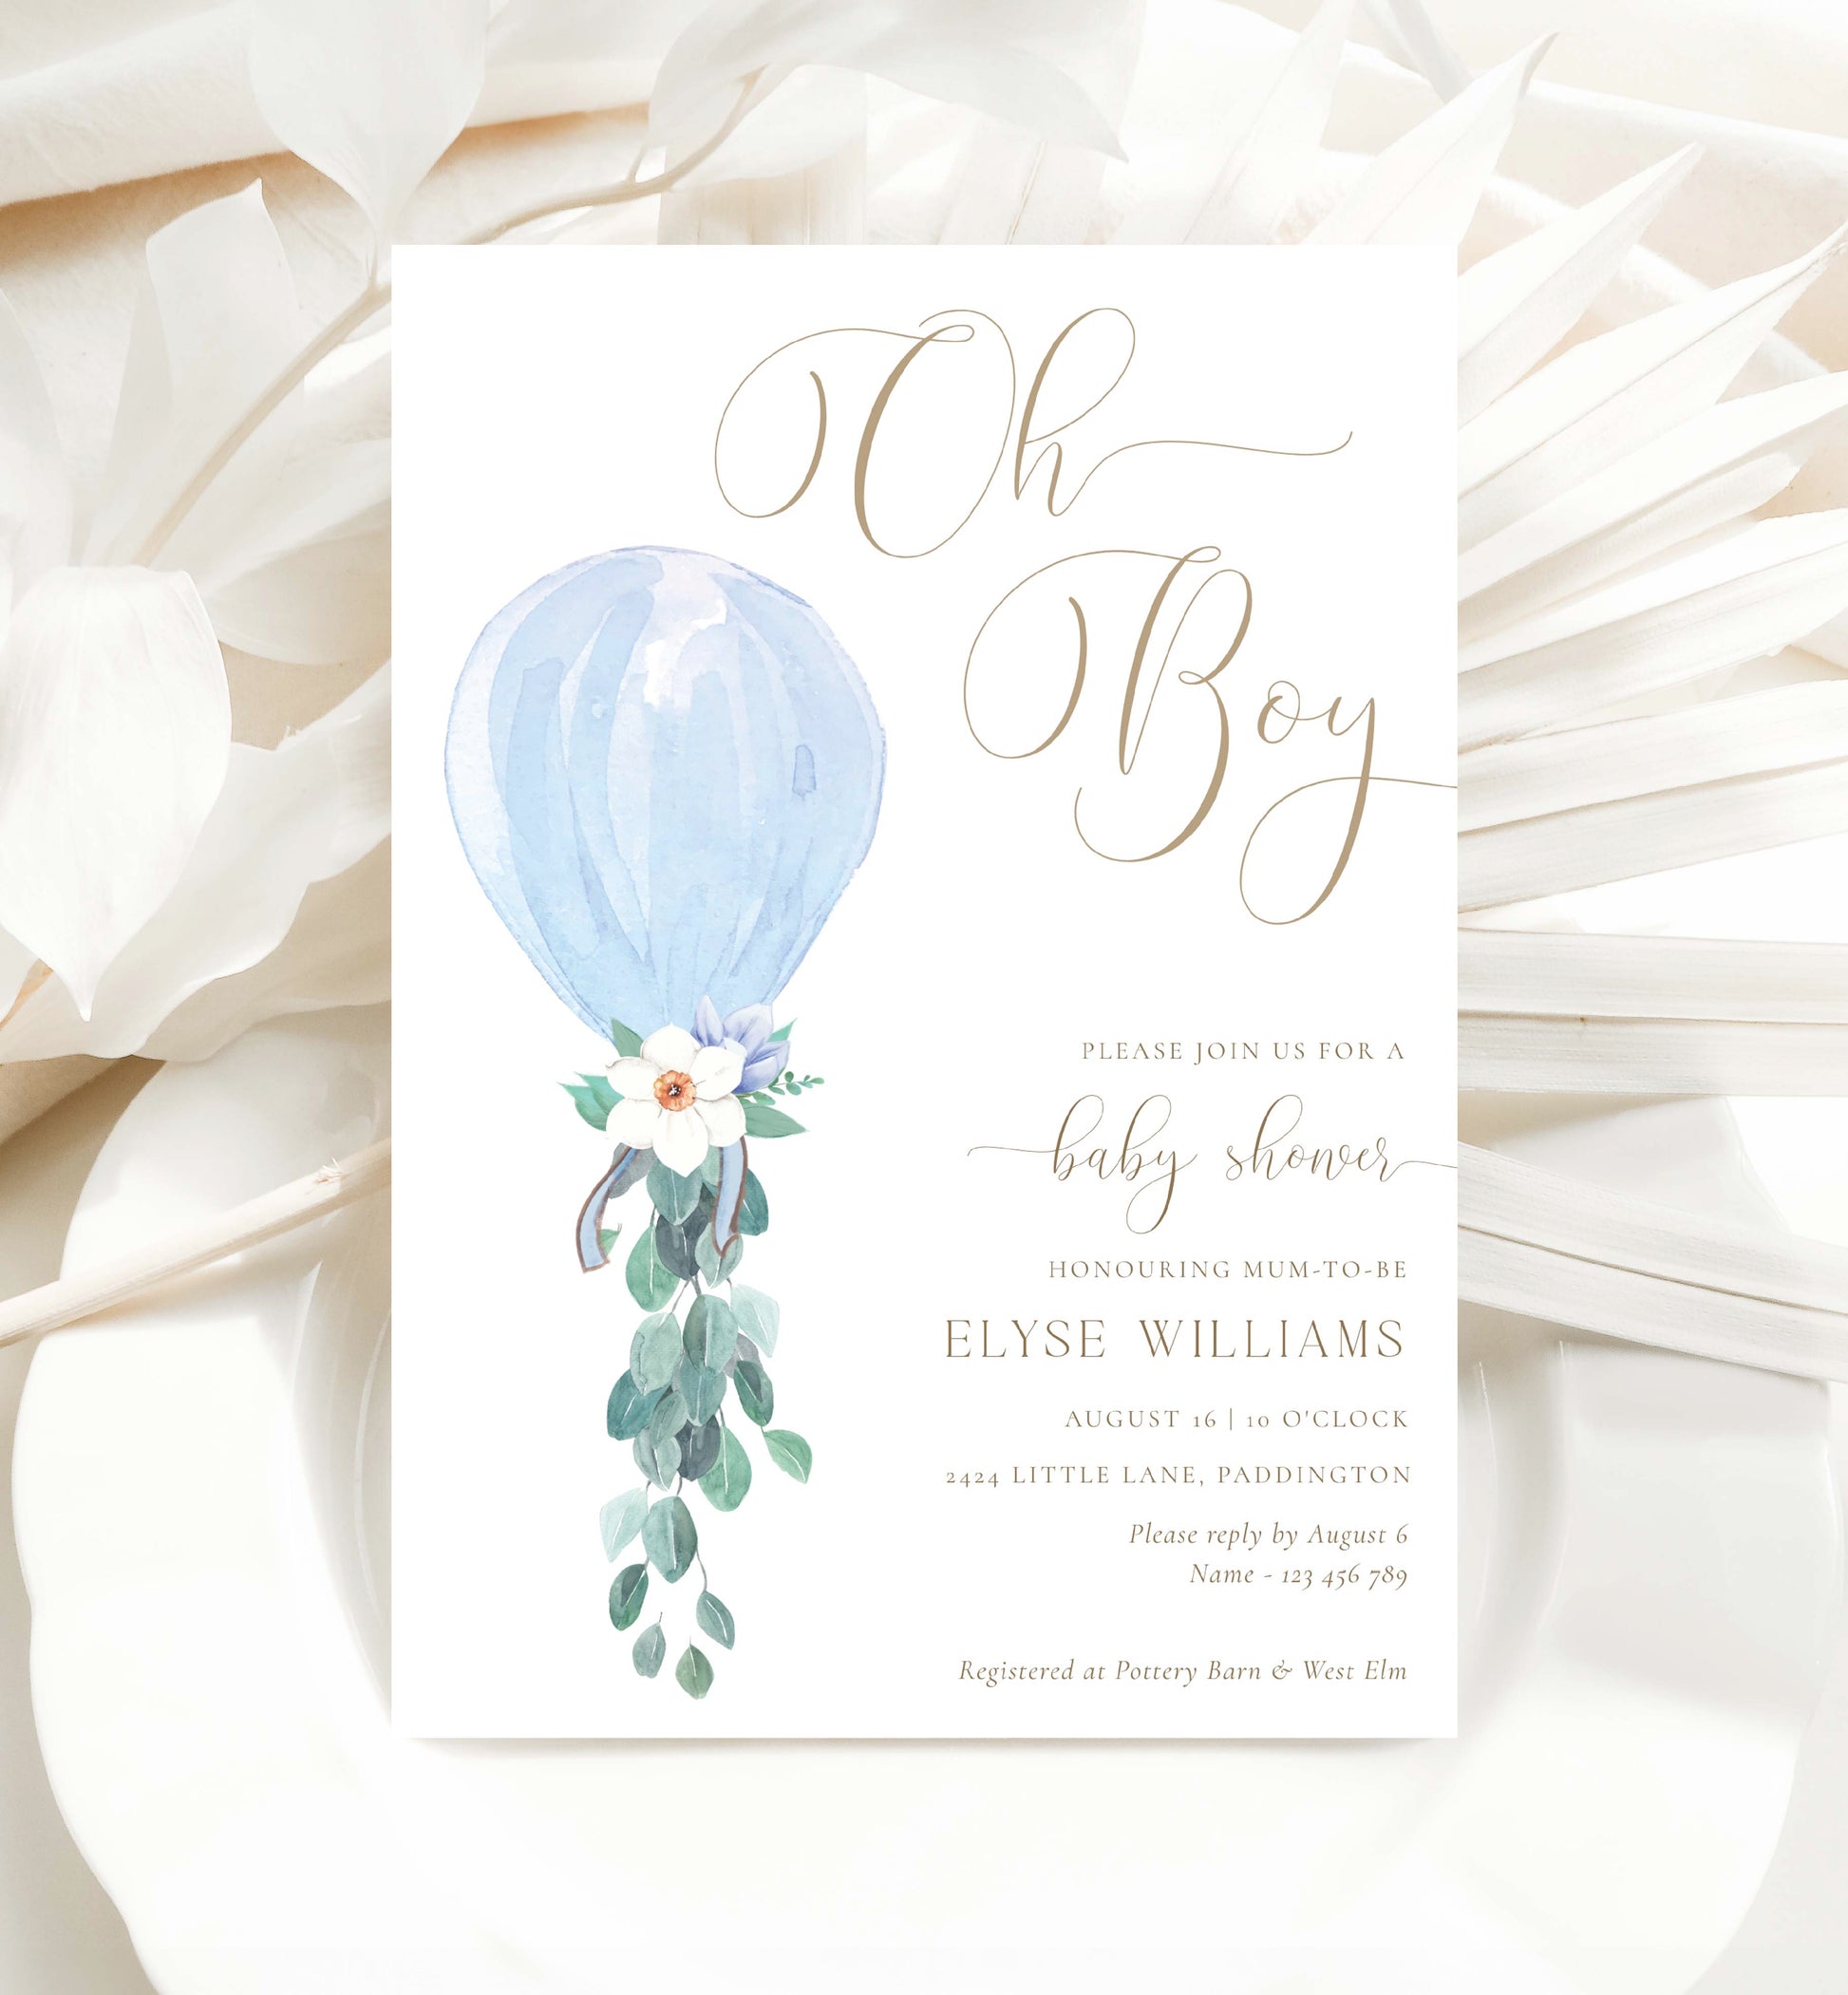 Oh Boy Baby Shower Invitation Template, Printable Balloon Boy Baby Shower Invitation, Editable Boy Baby Baby Shower Invitation, Darlington